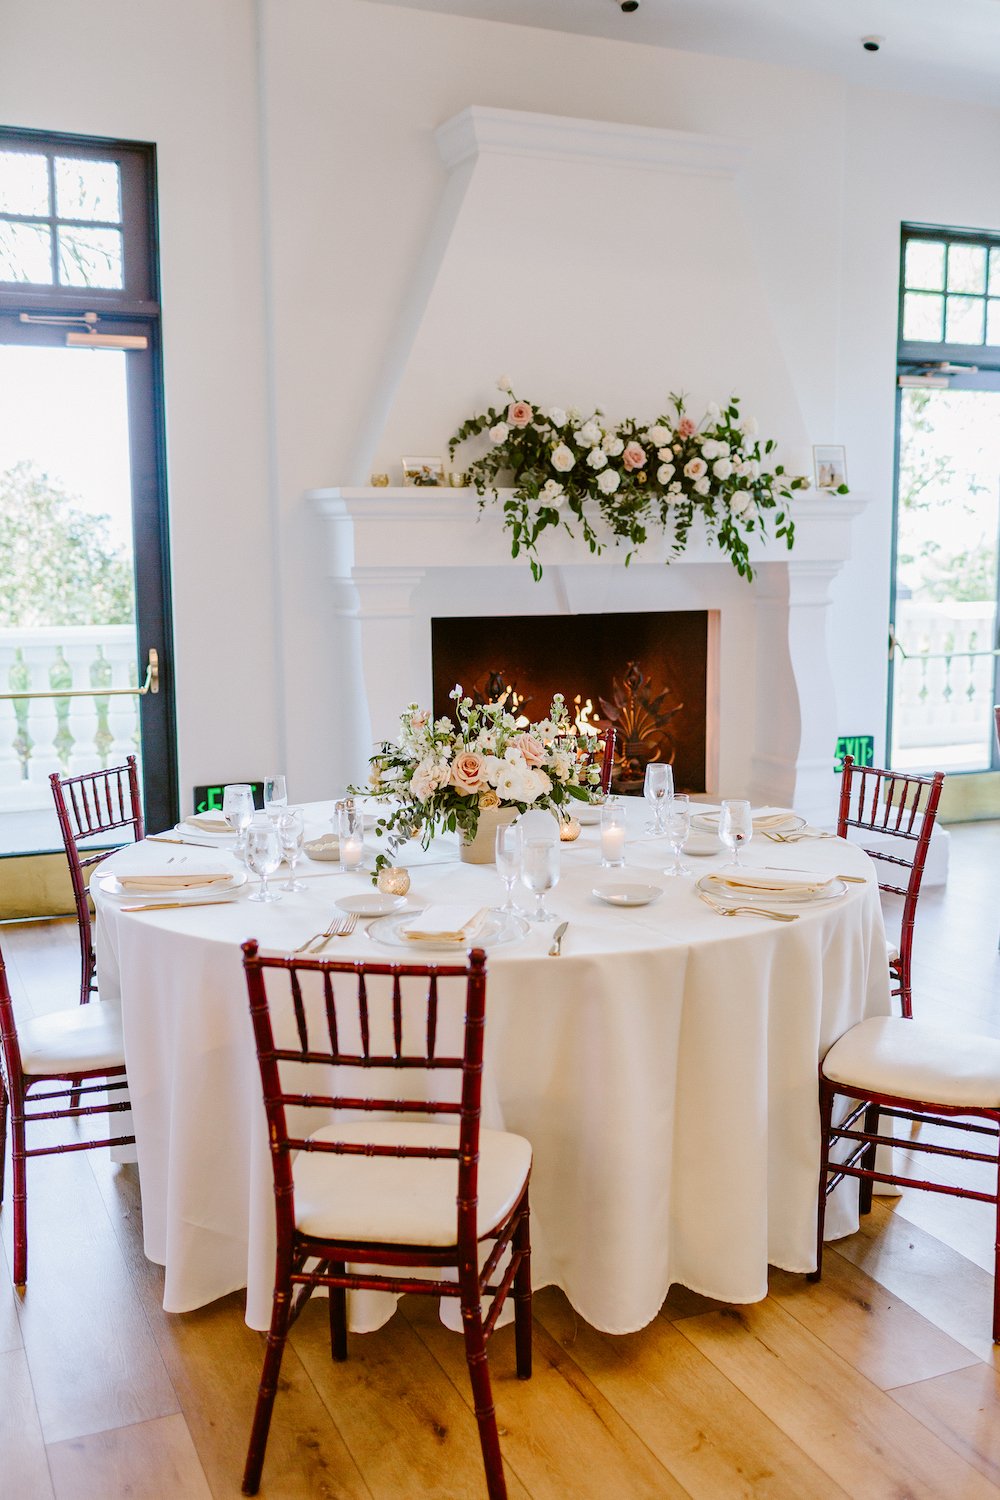 Garden wedding reception at the Spanish Hills Country Club in Los Angeles.